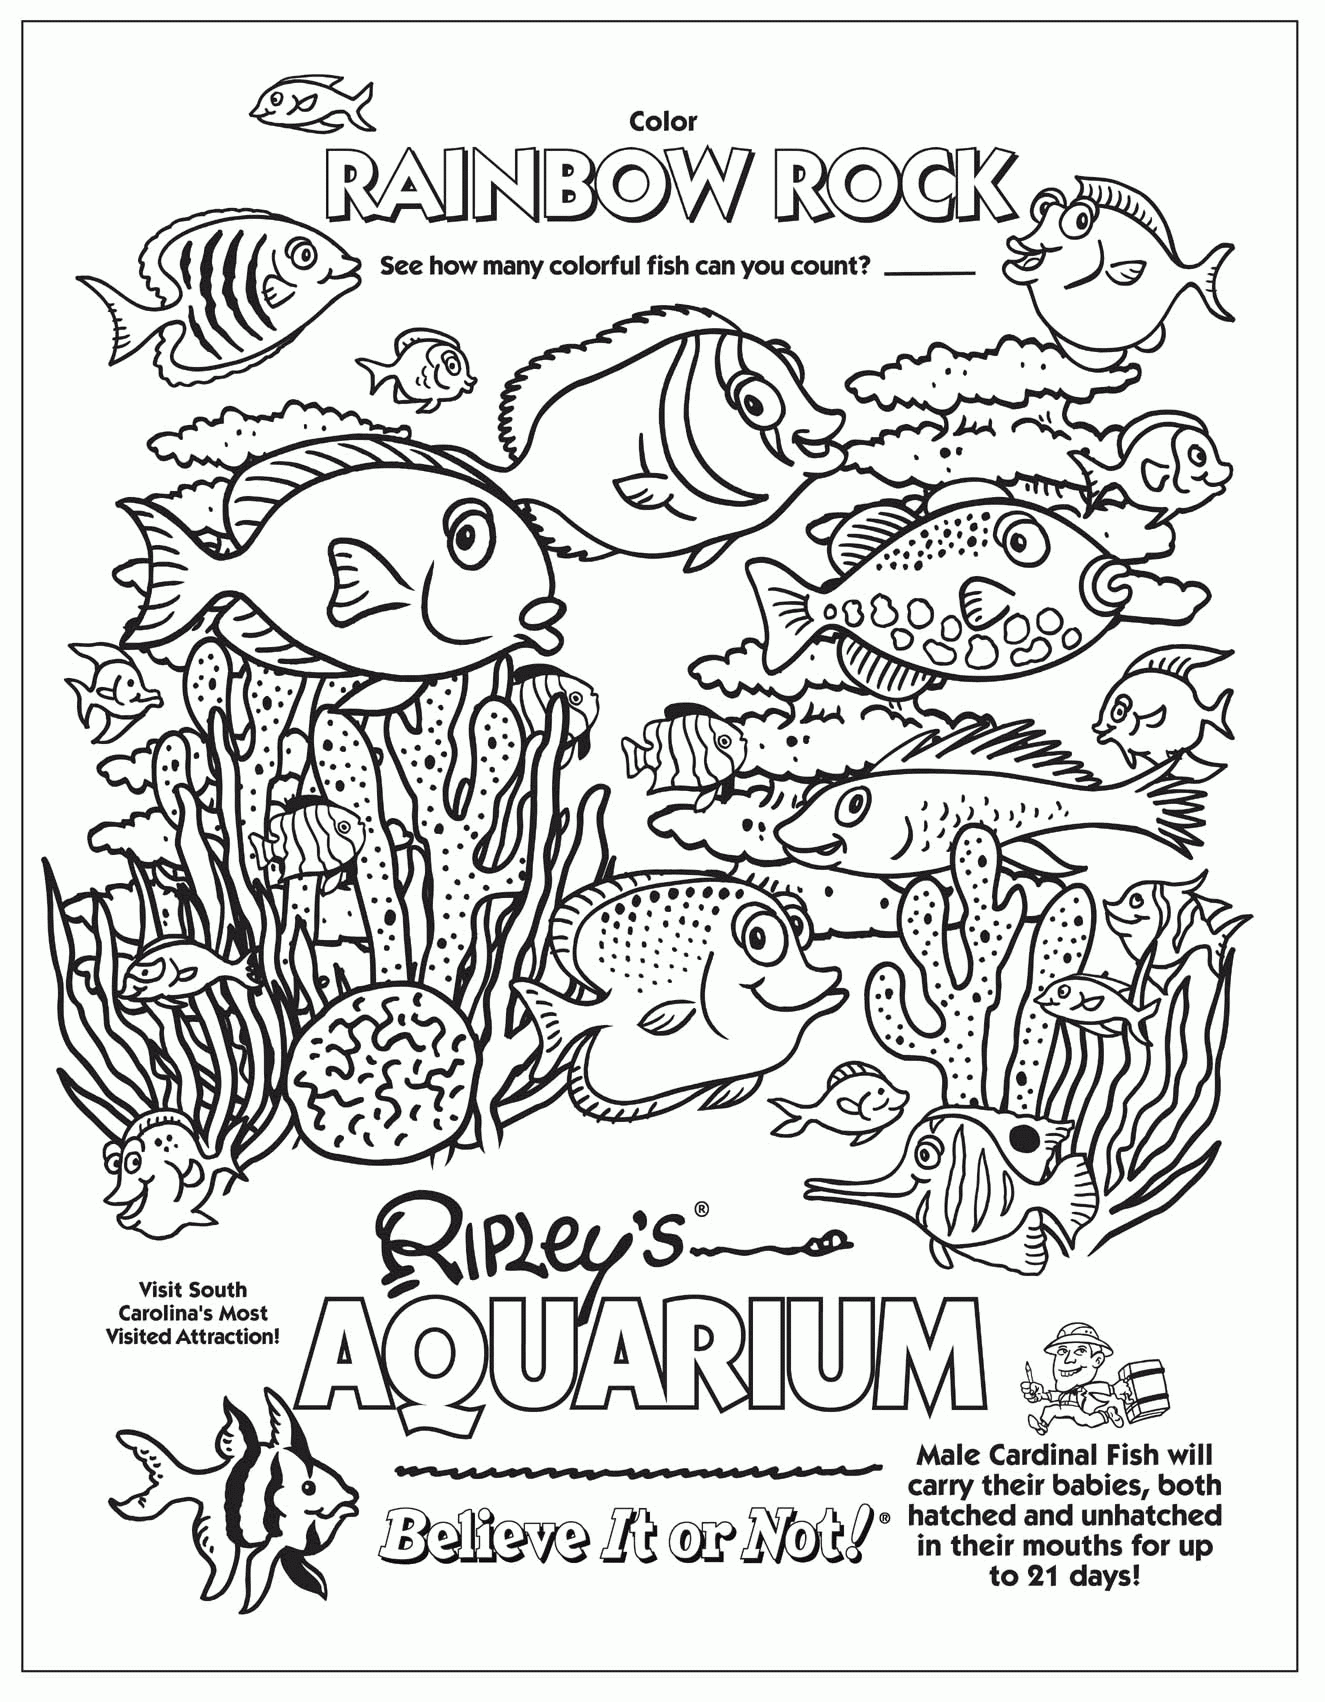 amazing aquarium coloring page kids coloring book learning stylish structure fish in aquarium coloring pages 